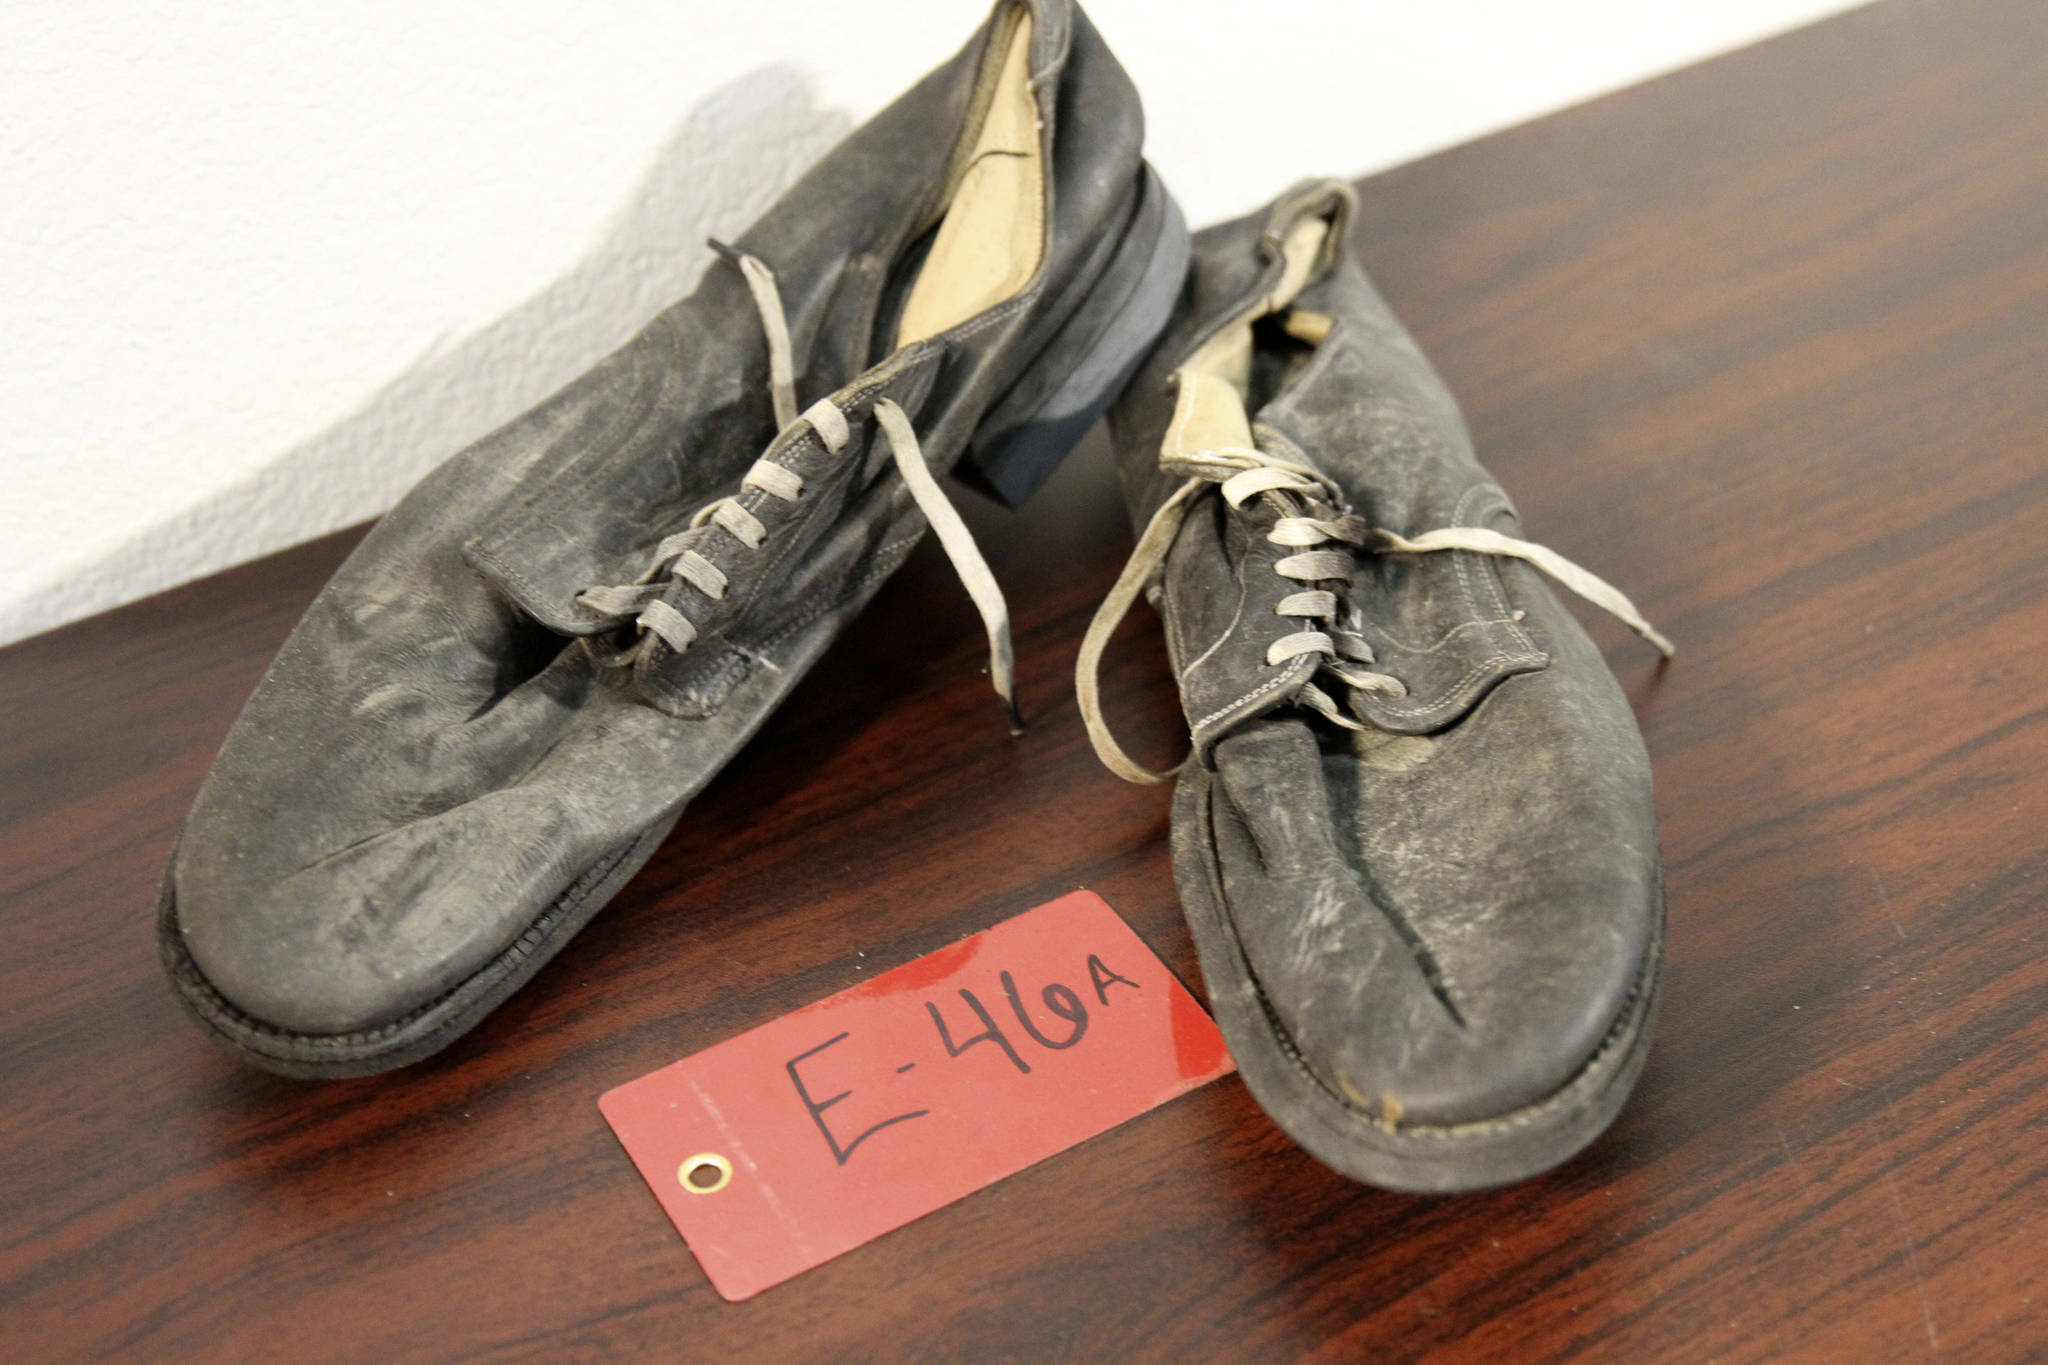 A pair of shoes recovered from the 1952 crash of a C-124 Globemaster were found this month on Colony Glacier and displayed at Joint Base Elmendorf-Richardson, Alaska, Tuesday, Sept. 29, 2021. The plane slammed into a mountain, killing 52 on board, and the plane and its crew have since become part of the glacier. The military has conducted annual summer recovery efforts, finding human remains and personal items on the glacier. (AP Photo/Mark Thiessen)